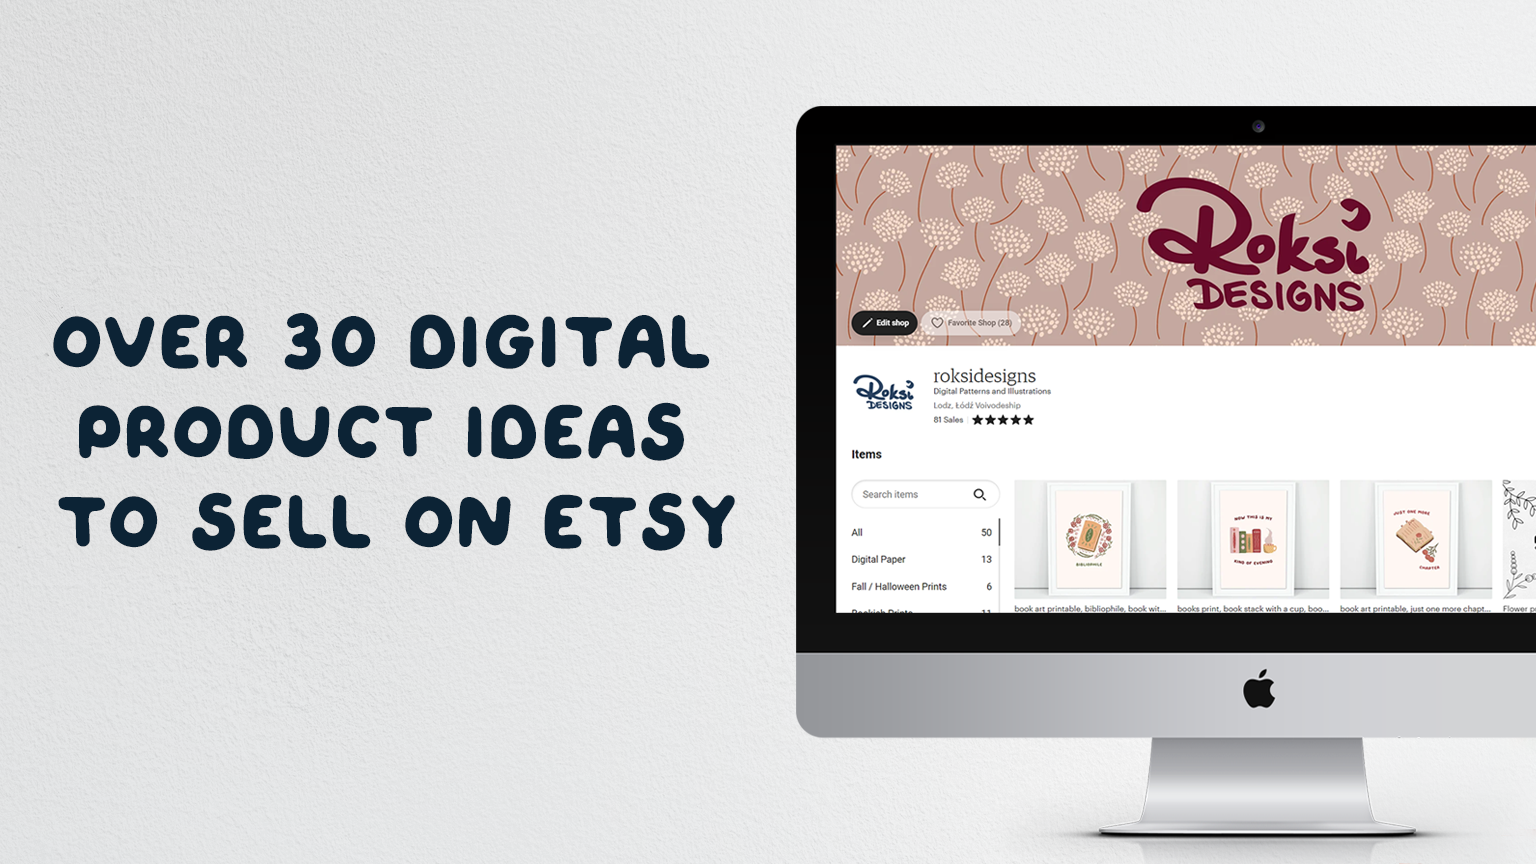 Over 30 digital product ideas to sell on etsy